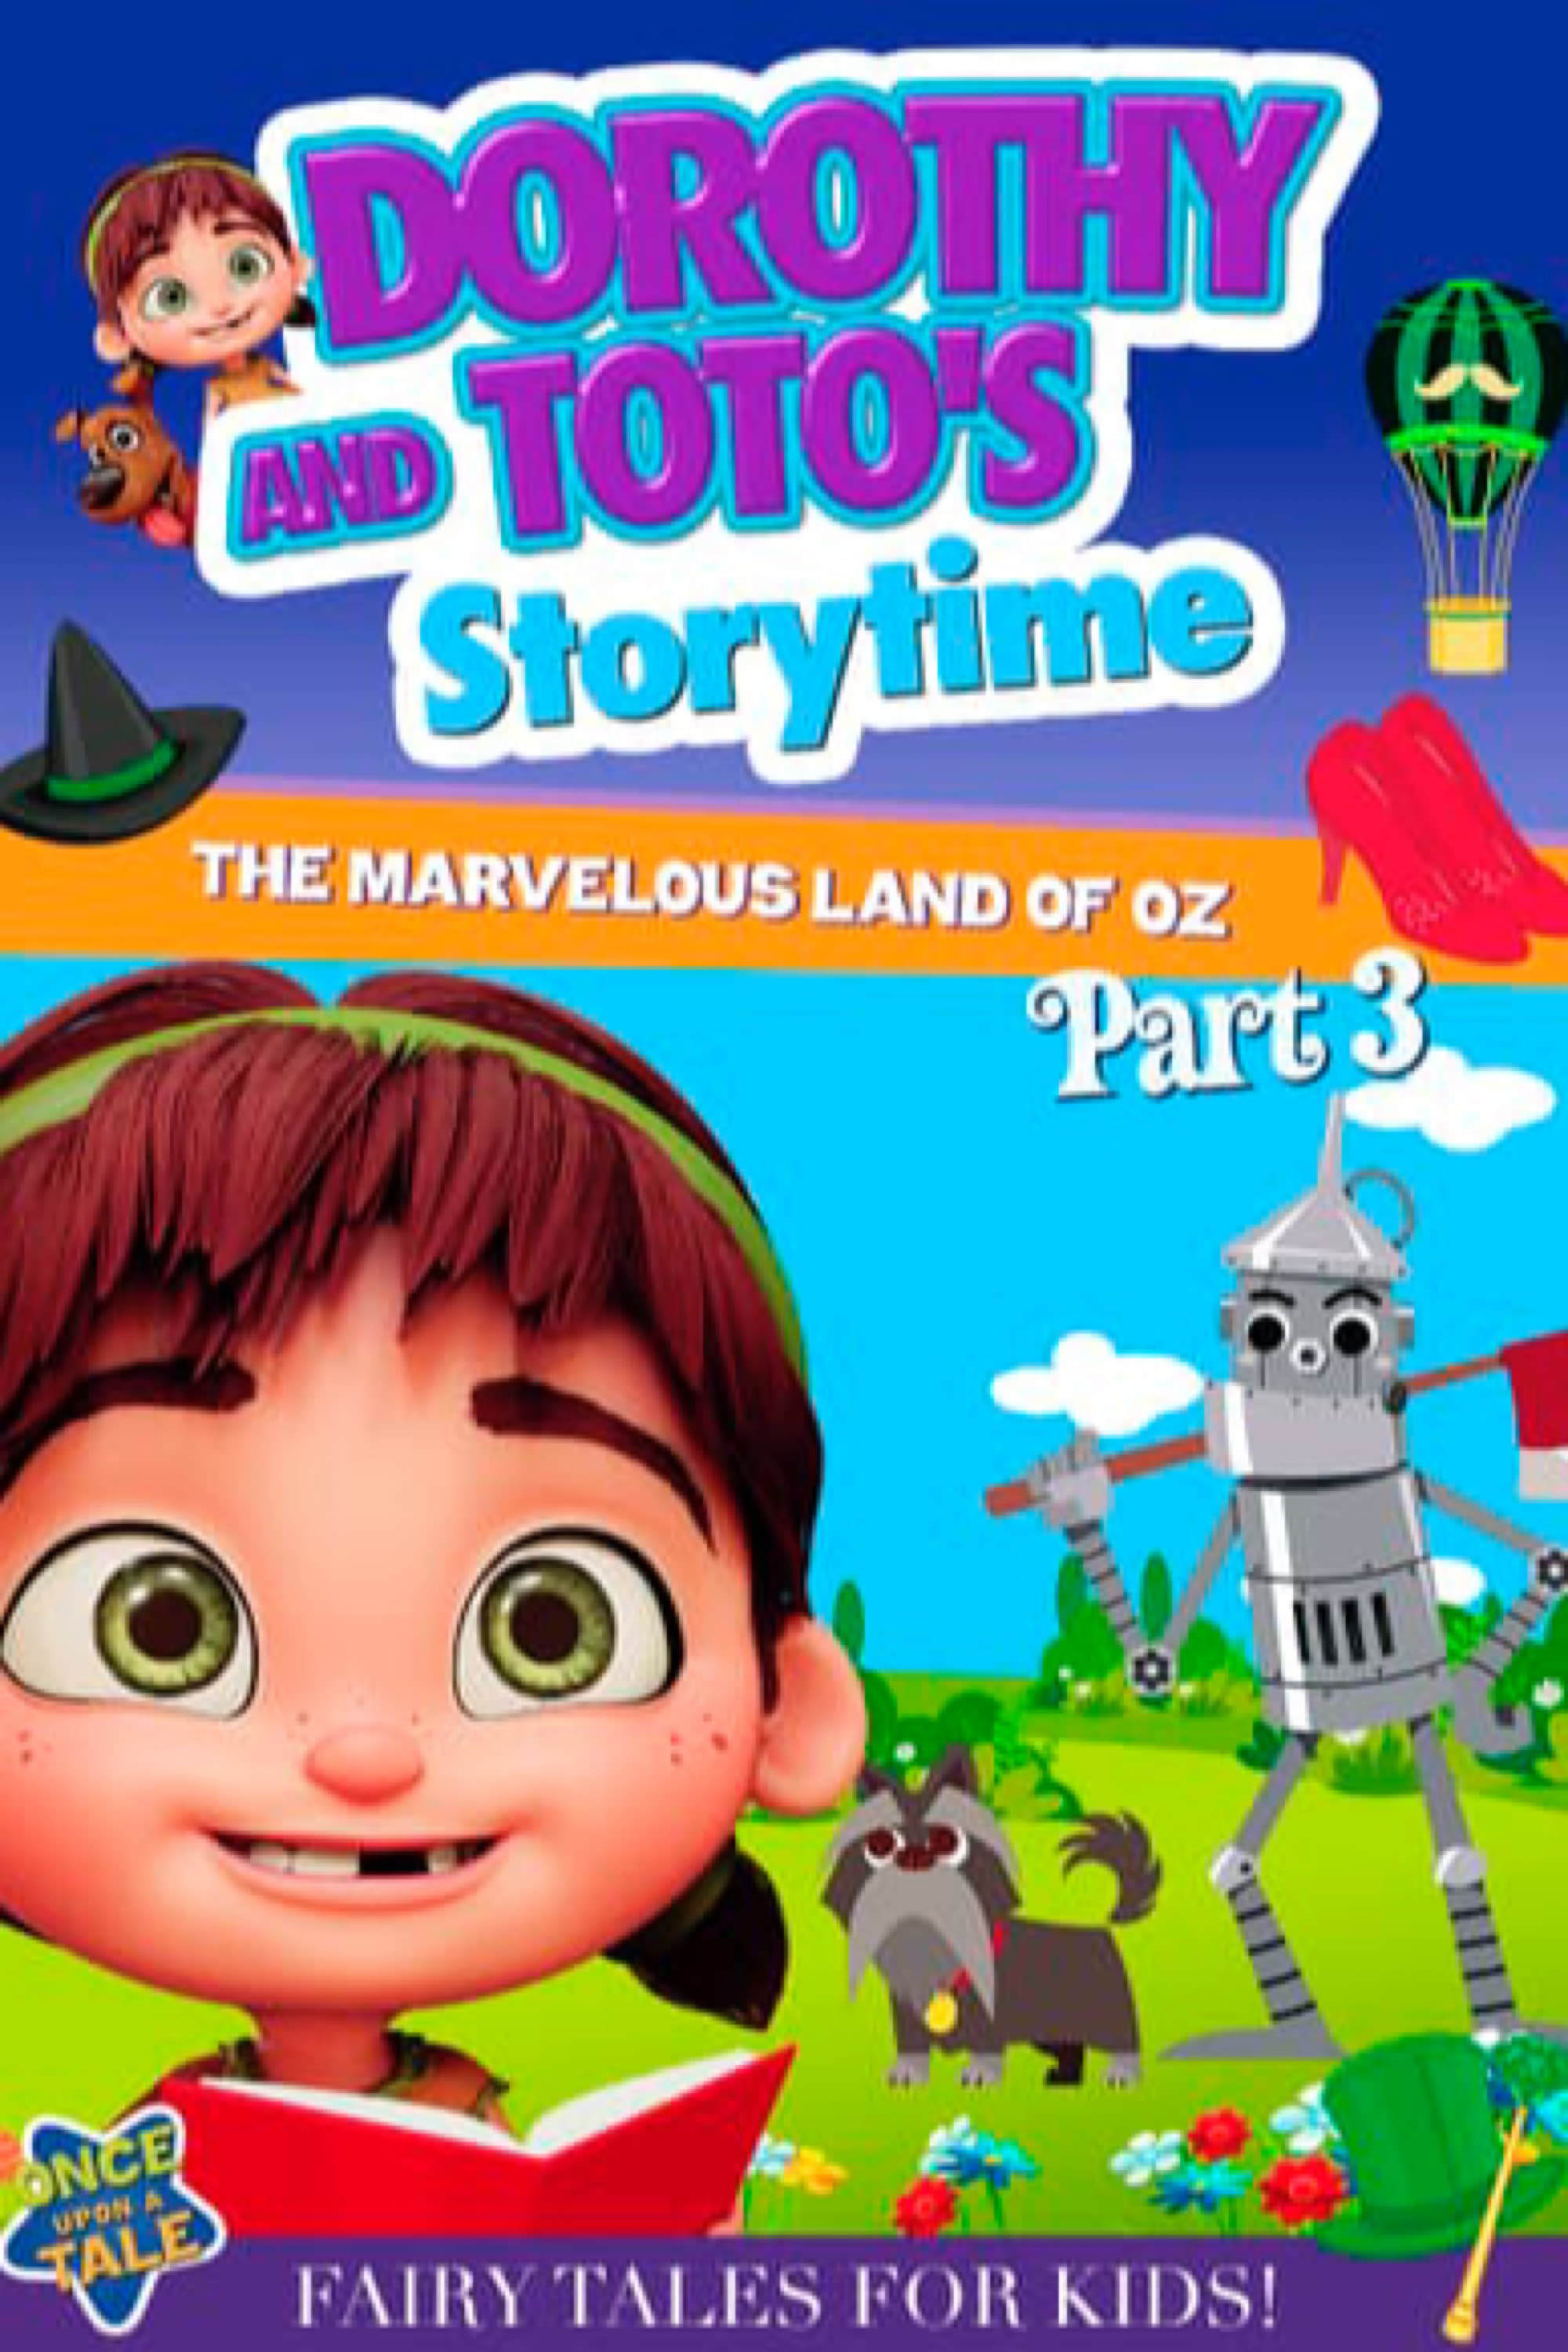 Dorothy and Toto's Storytime: The Marvelous Land of Oz Part 3